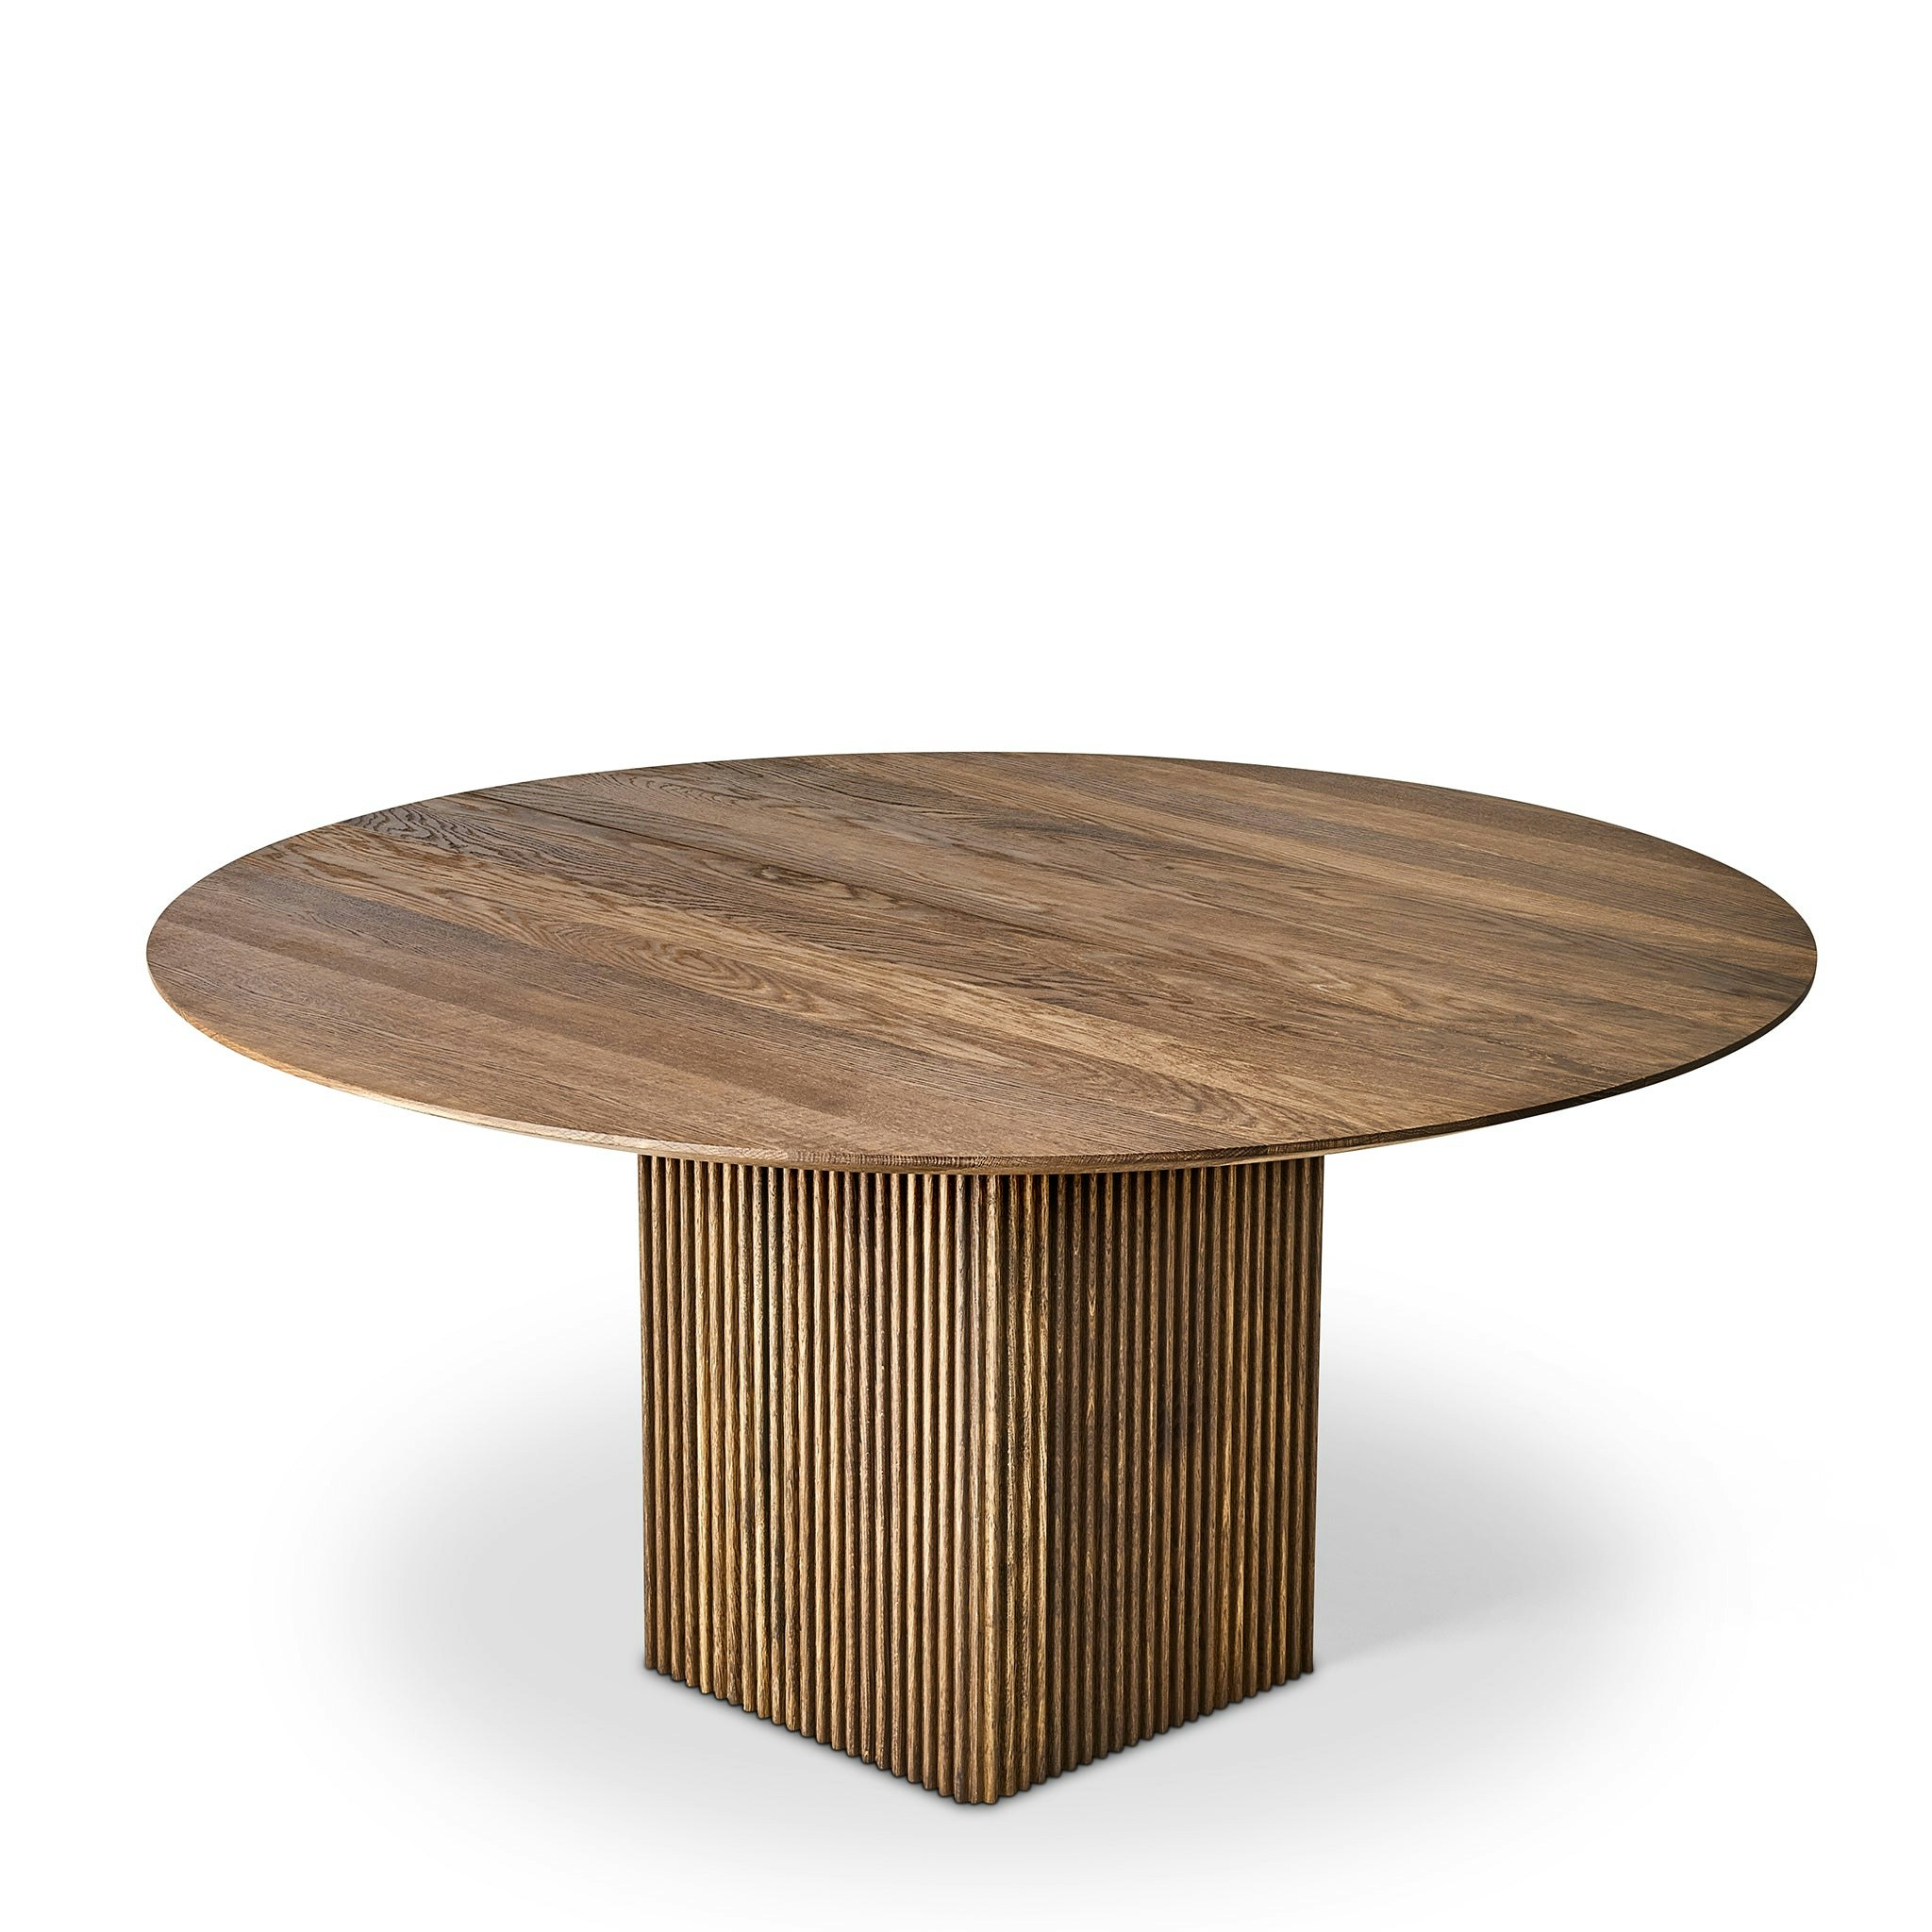 Ten Table Round by Christian Troels & Jacob Plejdrup for DK3